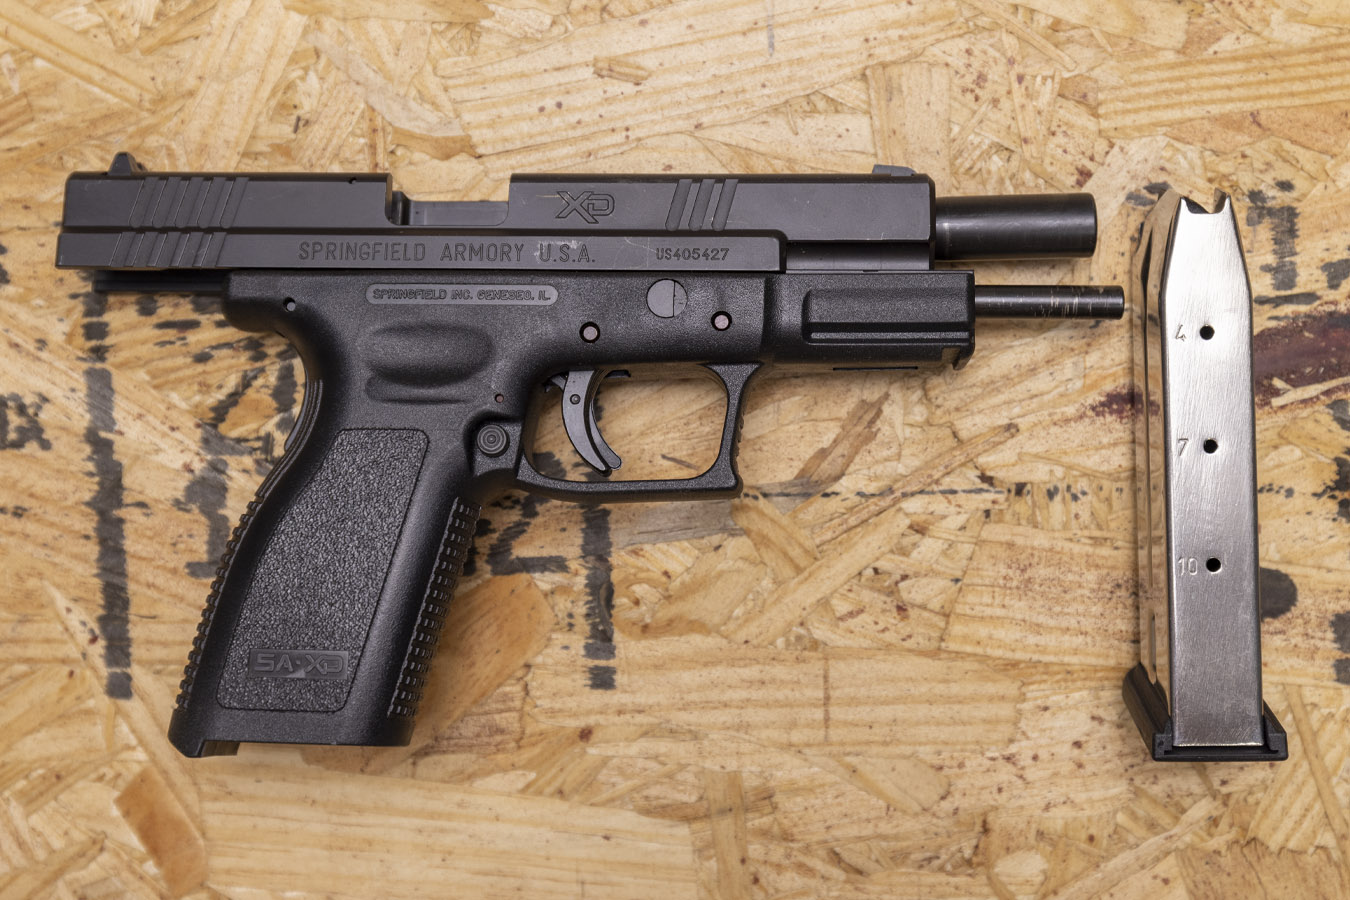 XD TACTICAL .40 SW POLICE TRADE-IN PISTOL